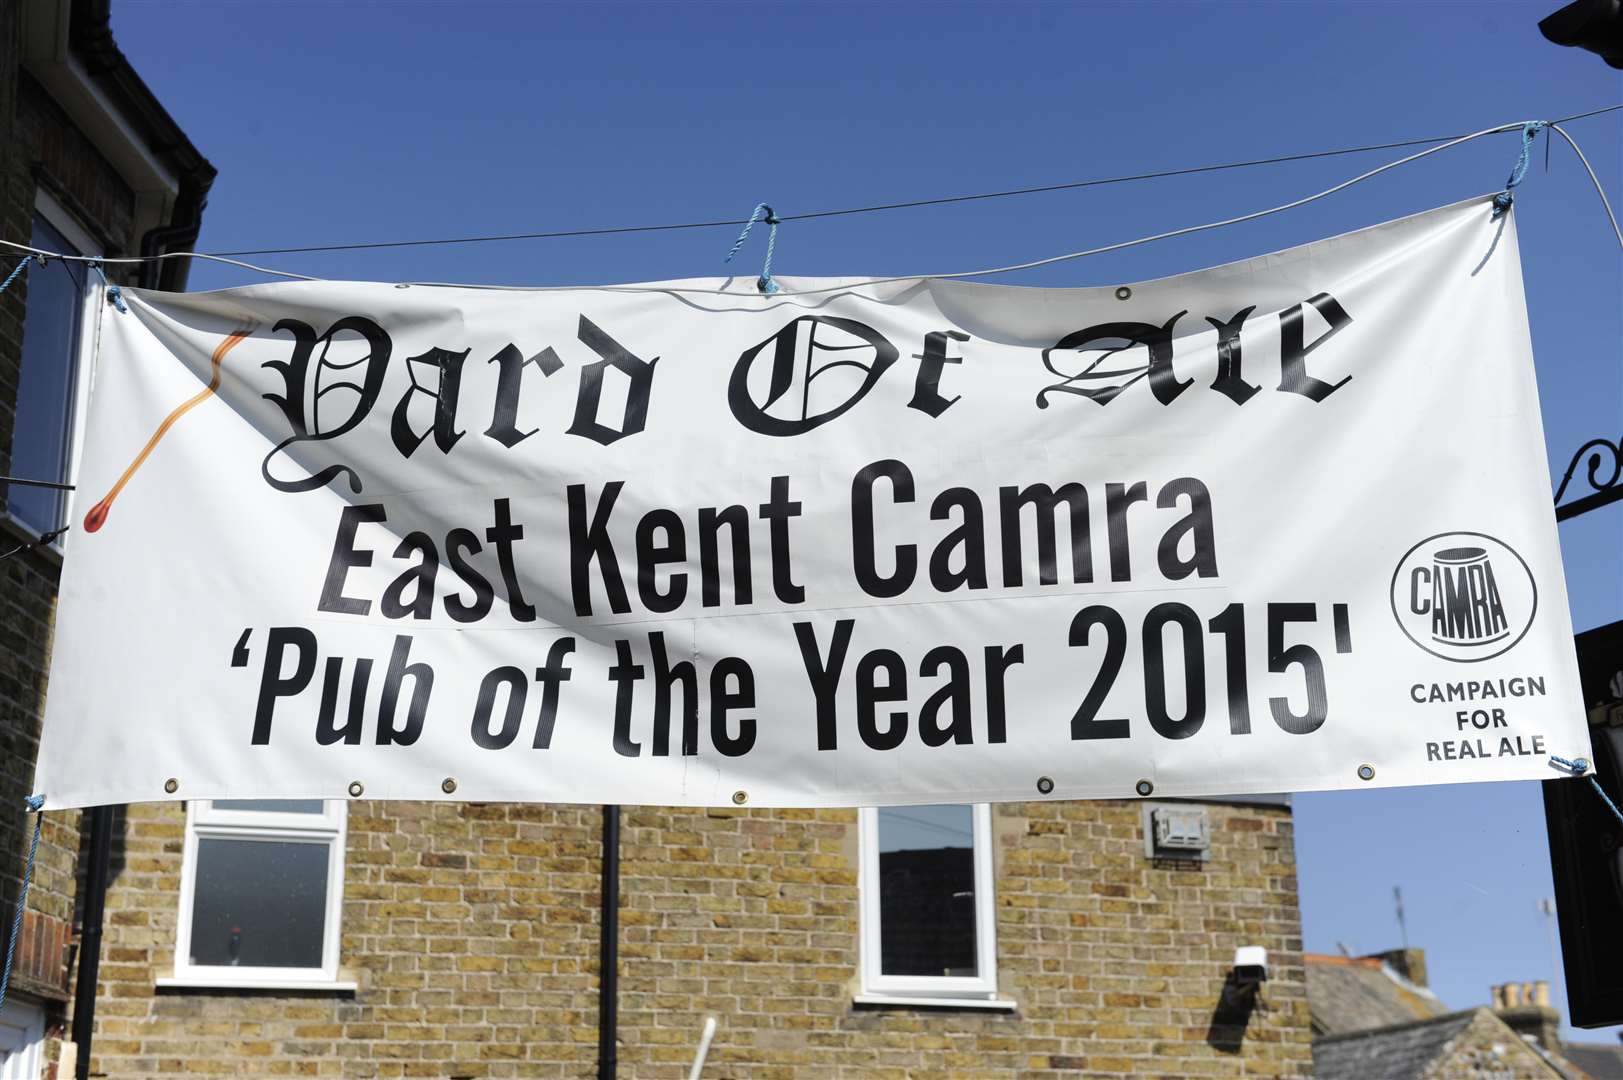 The pub is flying a banner outside